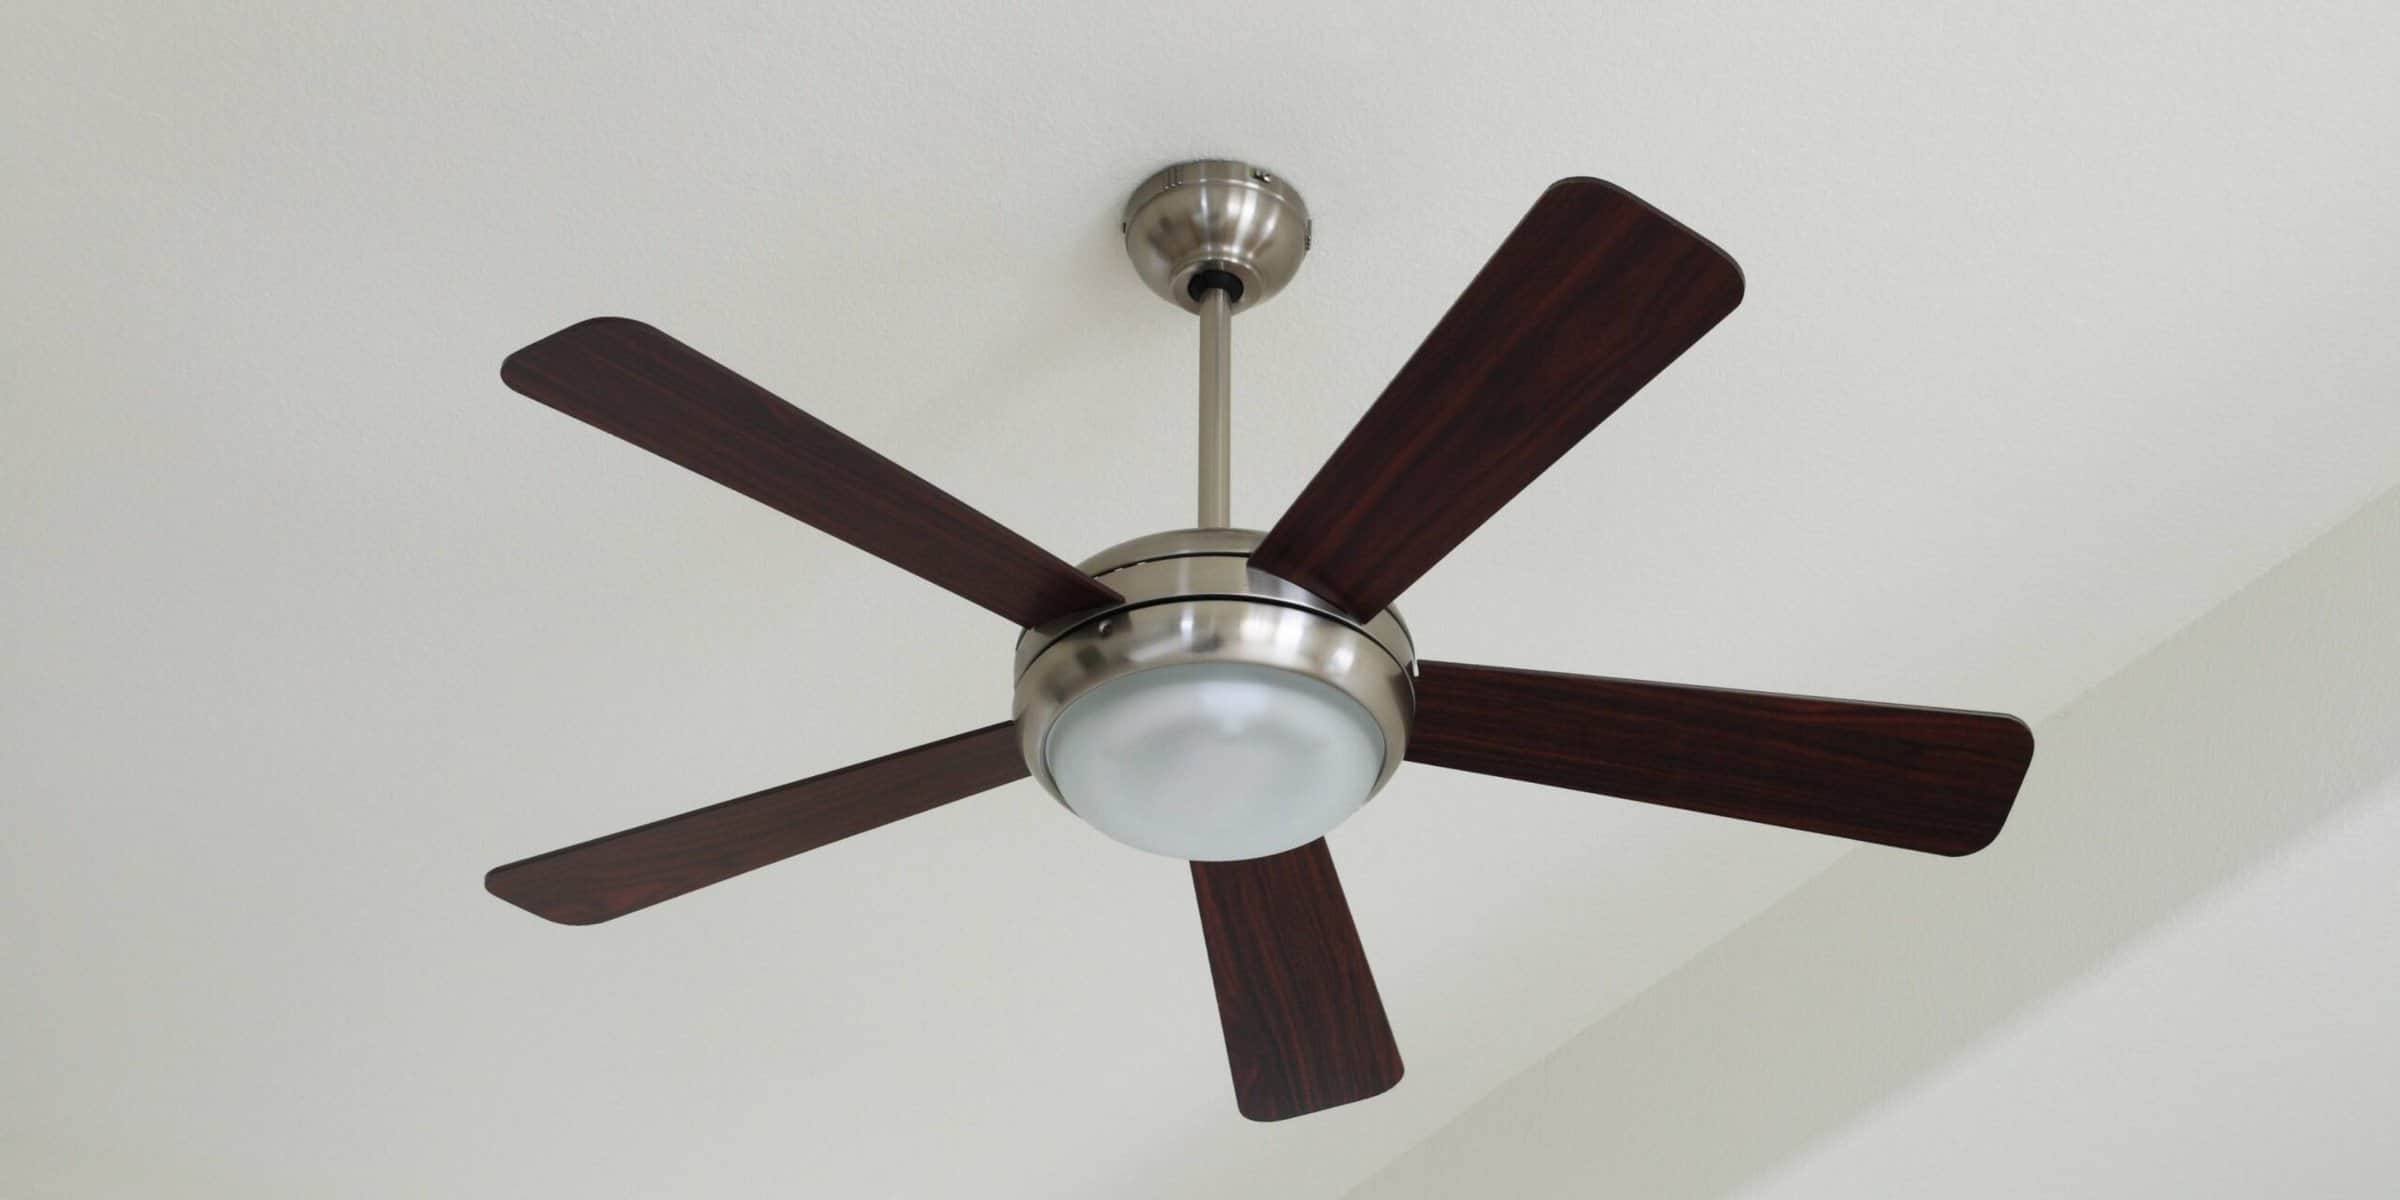 How To Clean Ceiling Fans With Vinegar (6 Simple Steps)